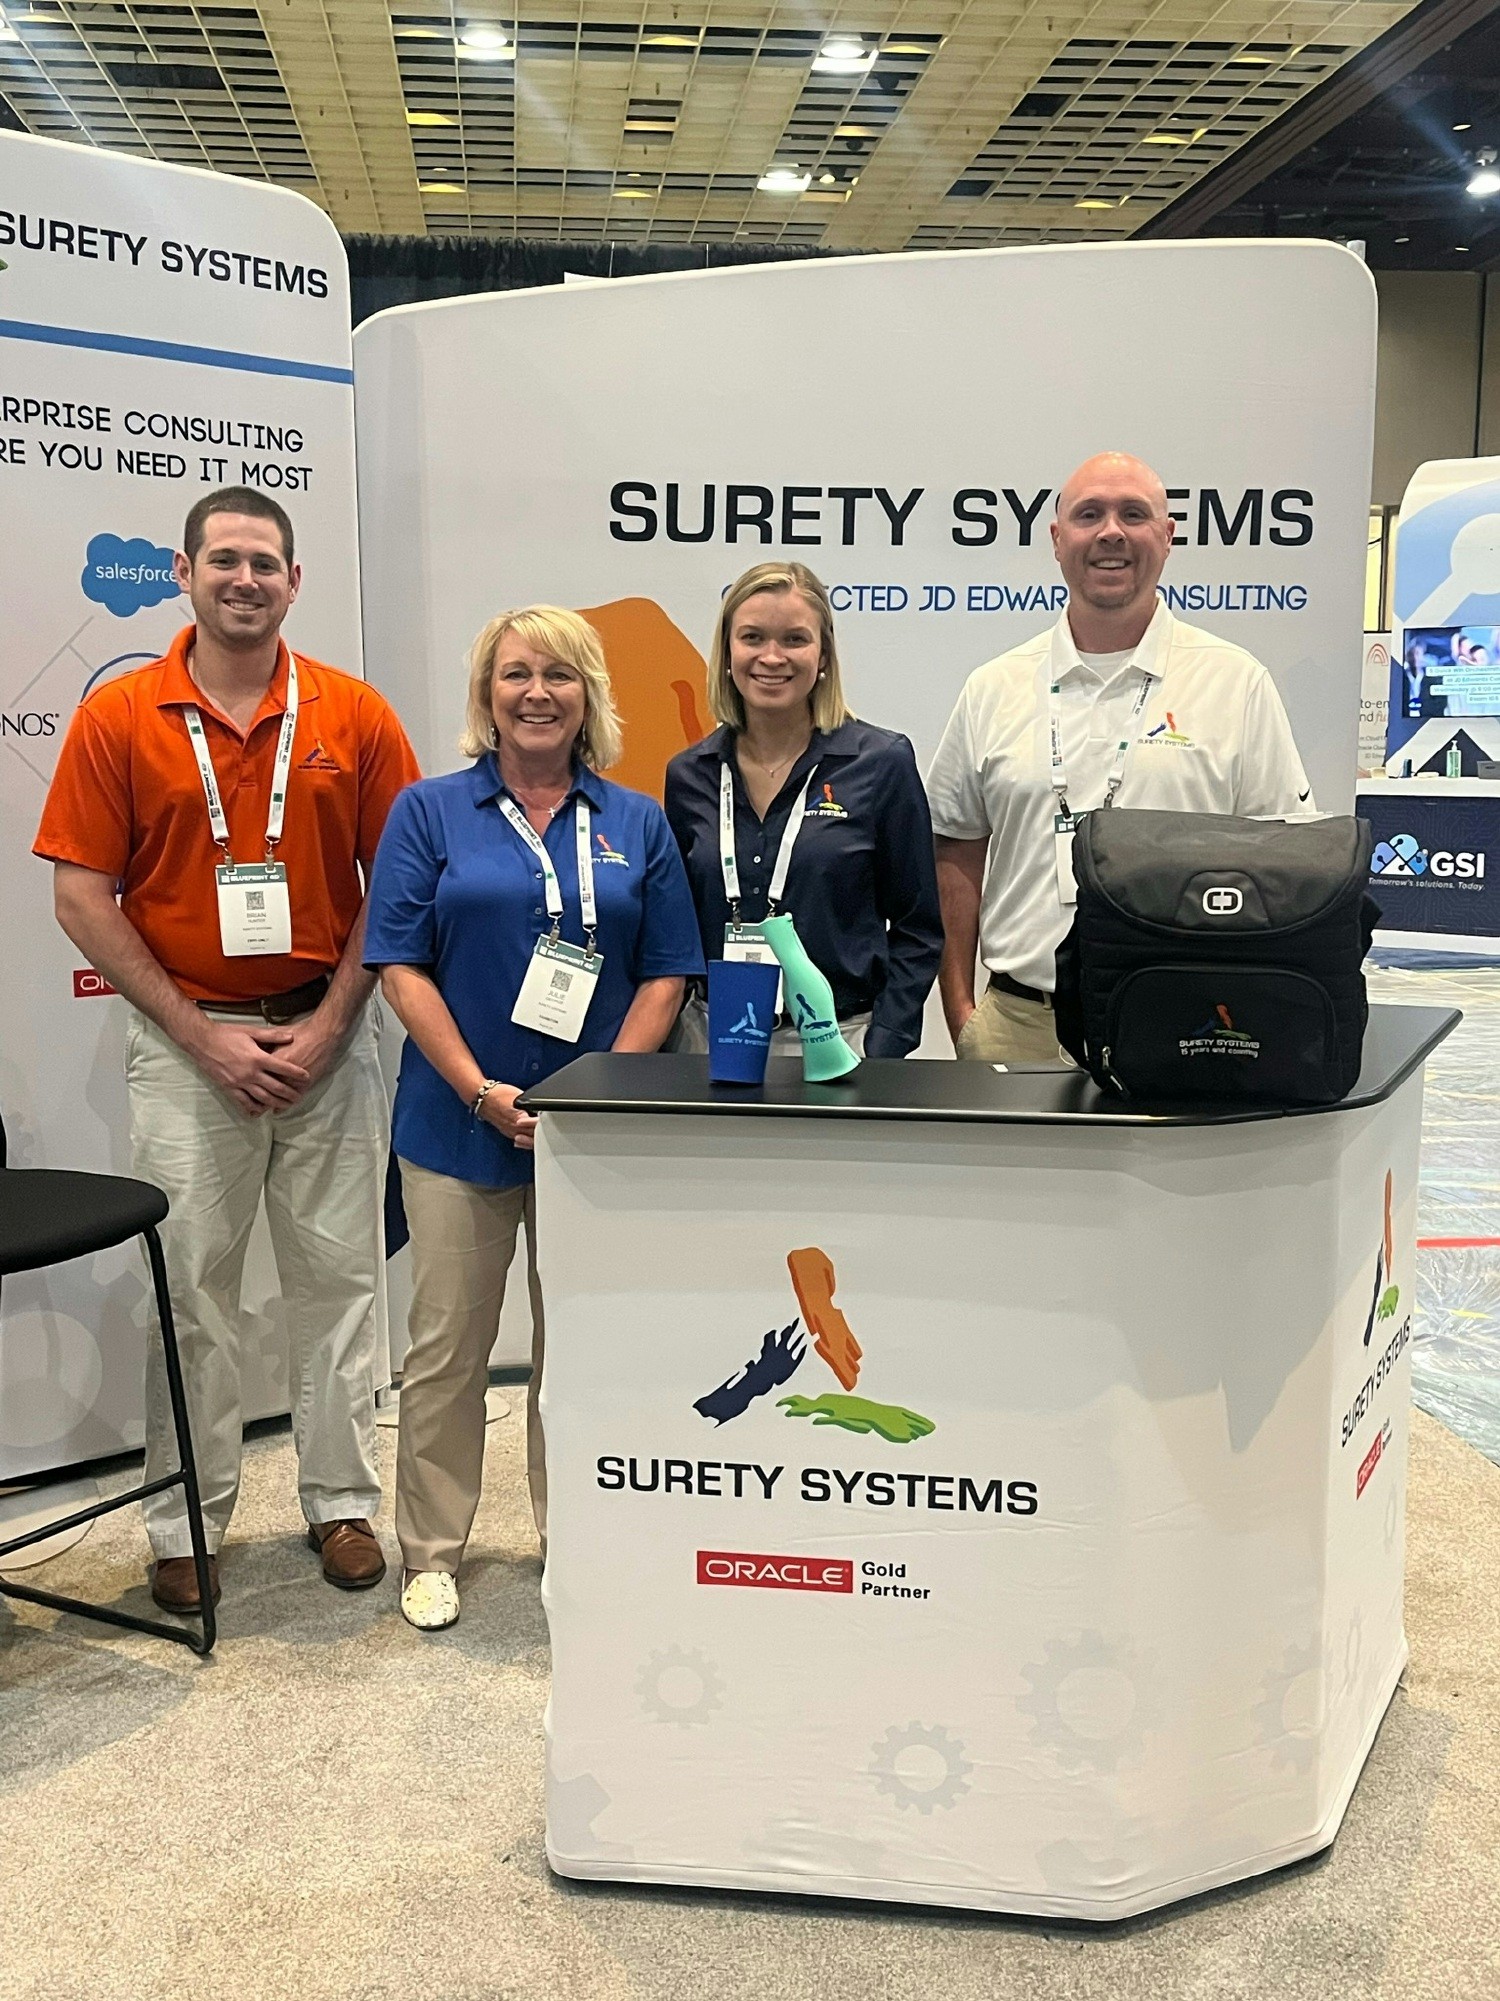 Surety Systems at a software conference in Las Vegas